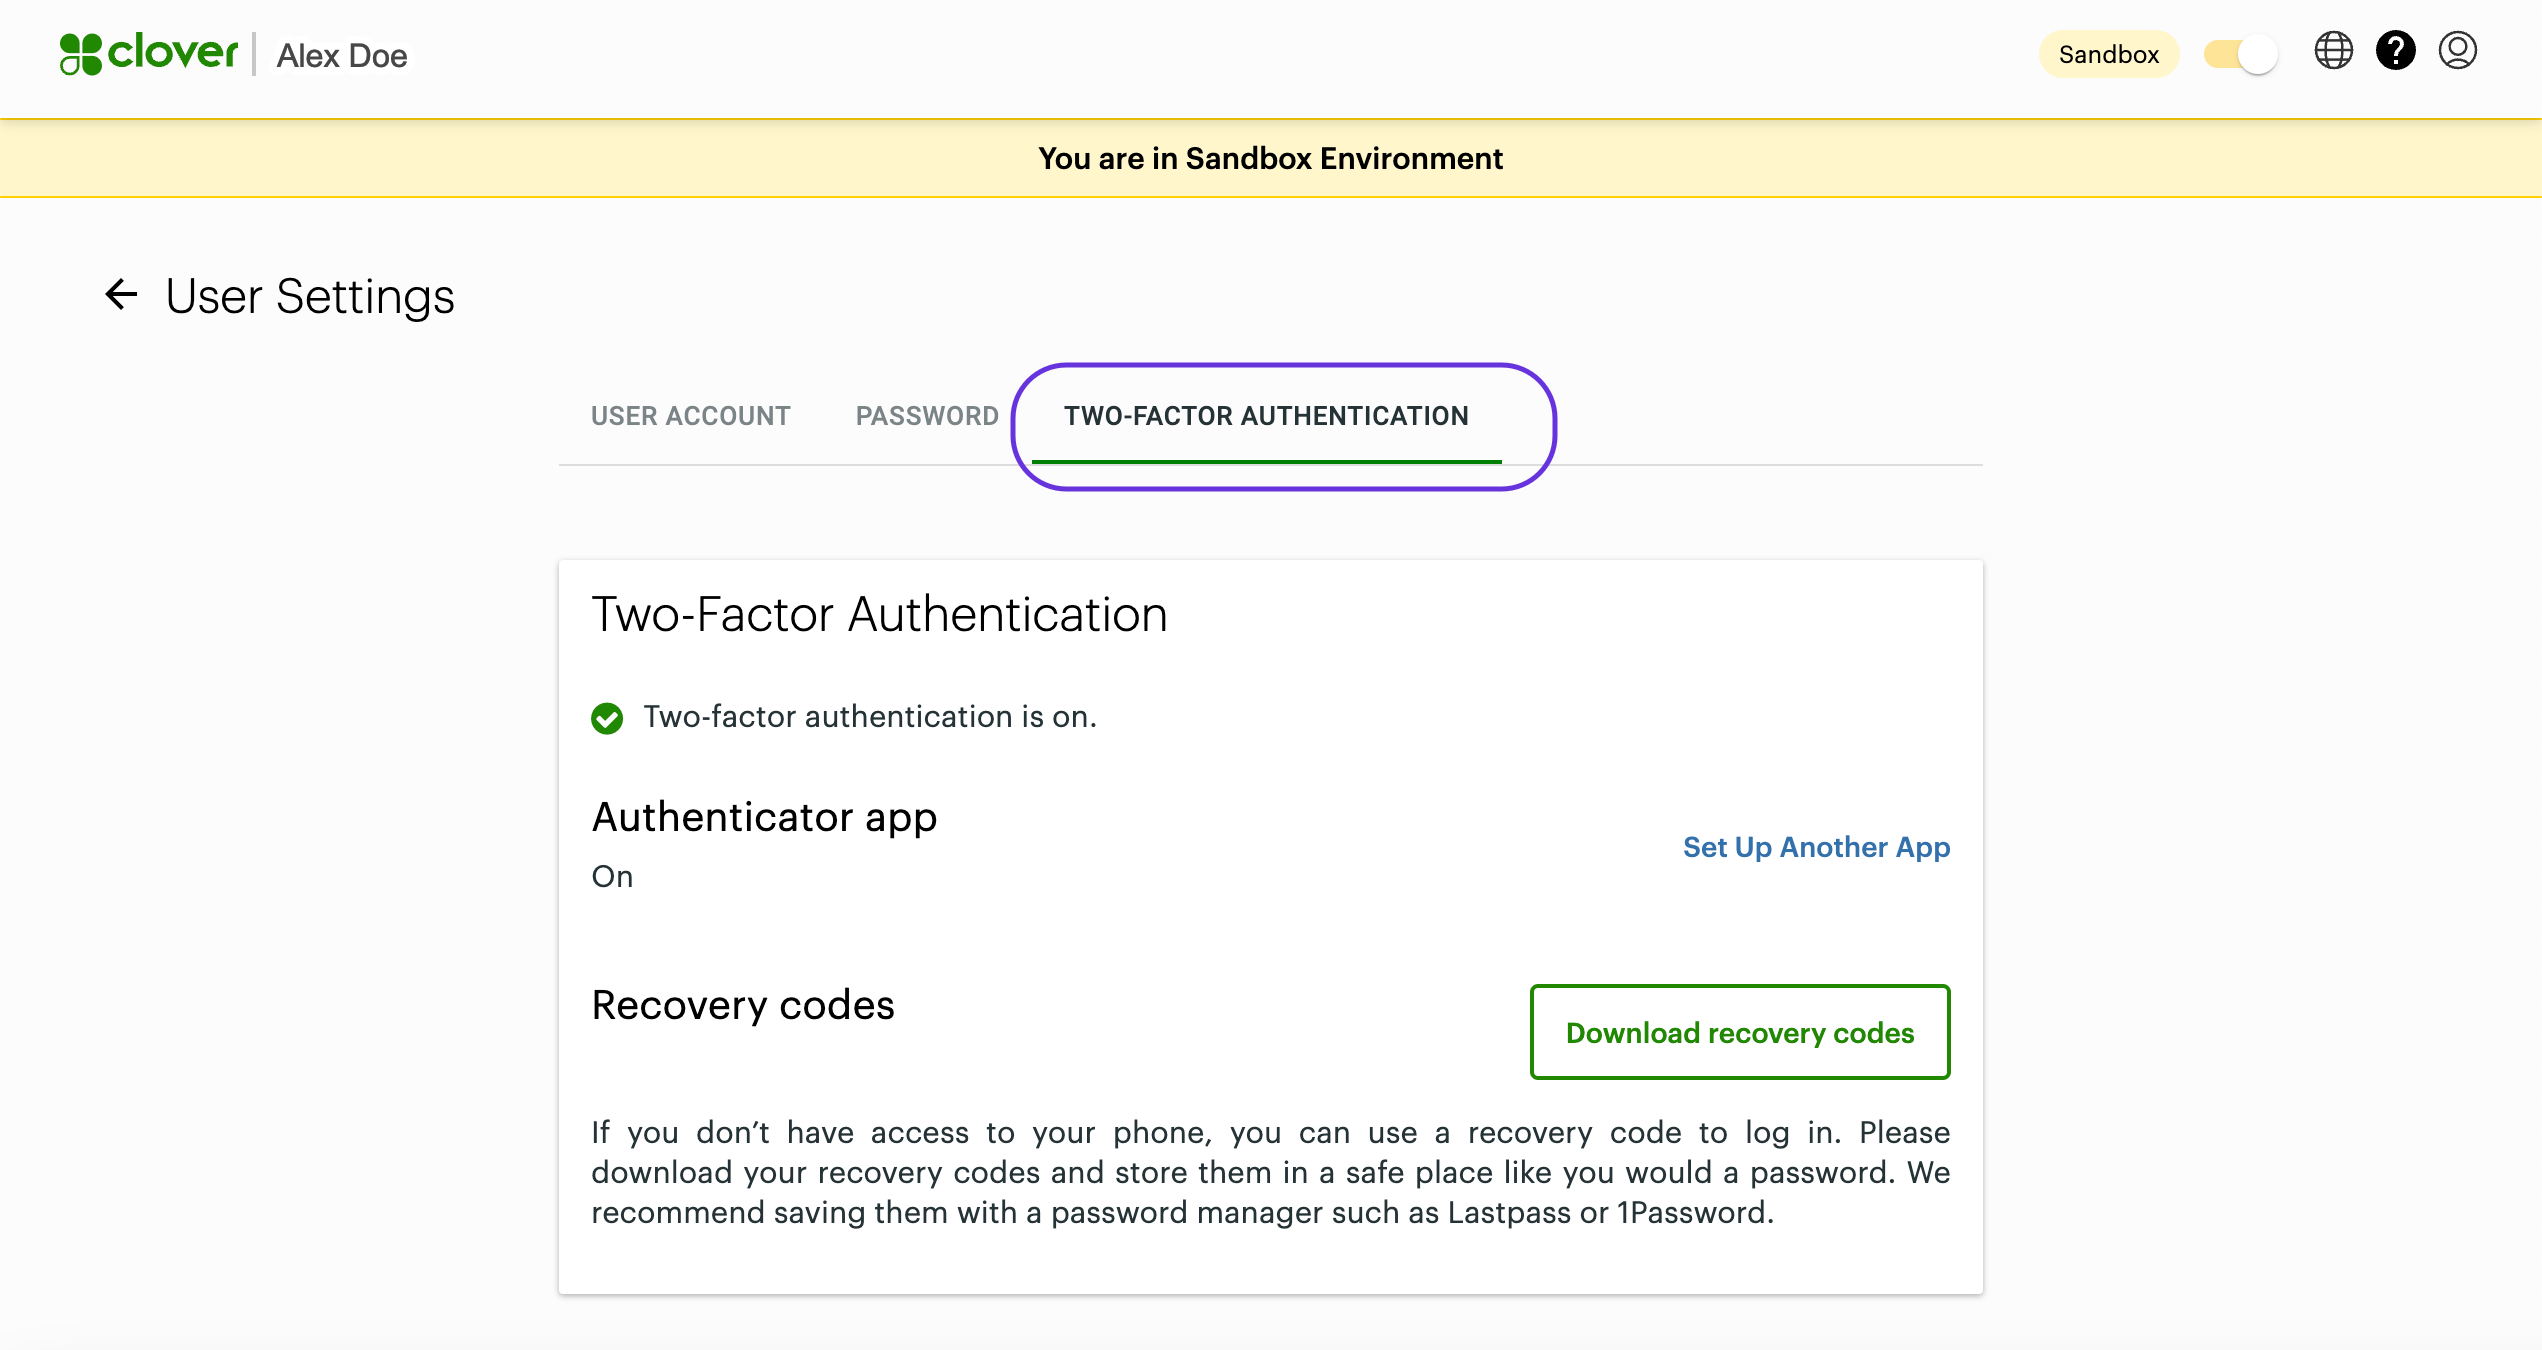 Global Developer Dashboard: User Settings > Two-factor authentication